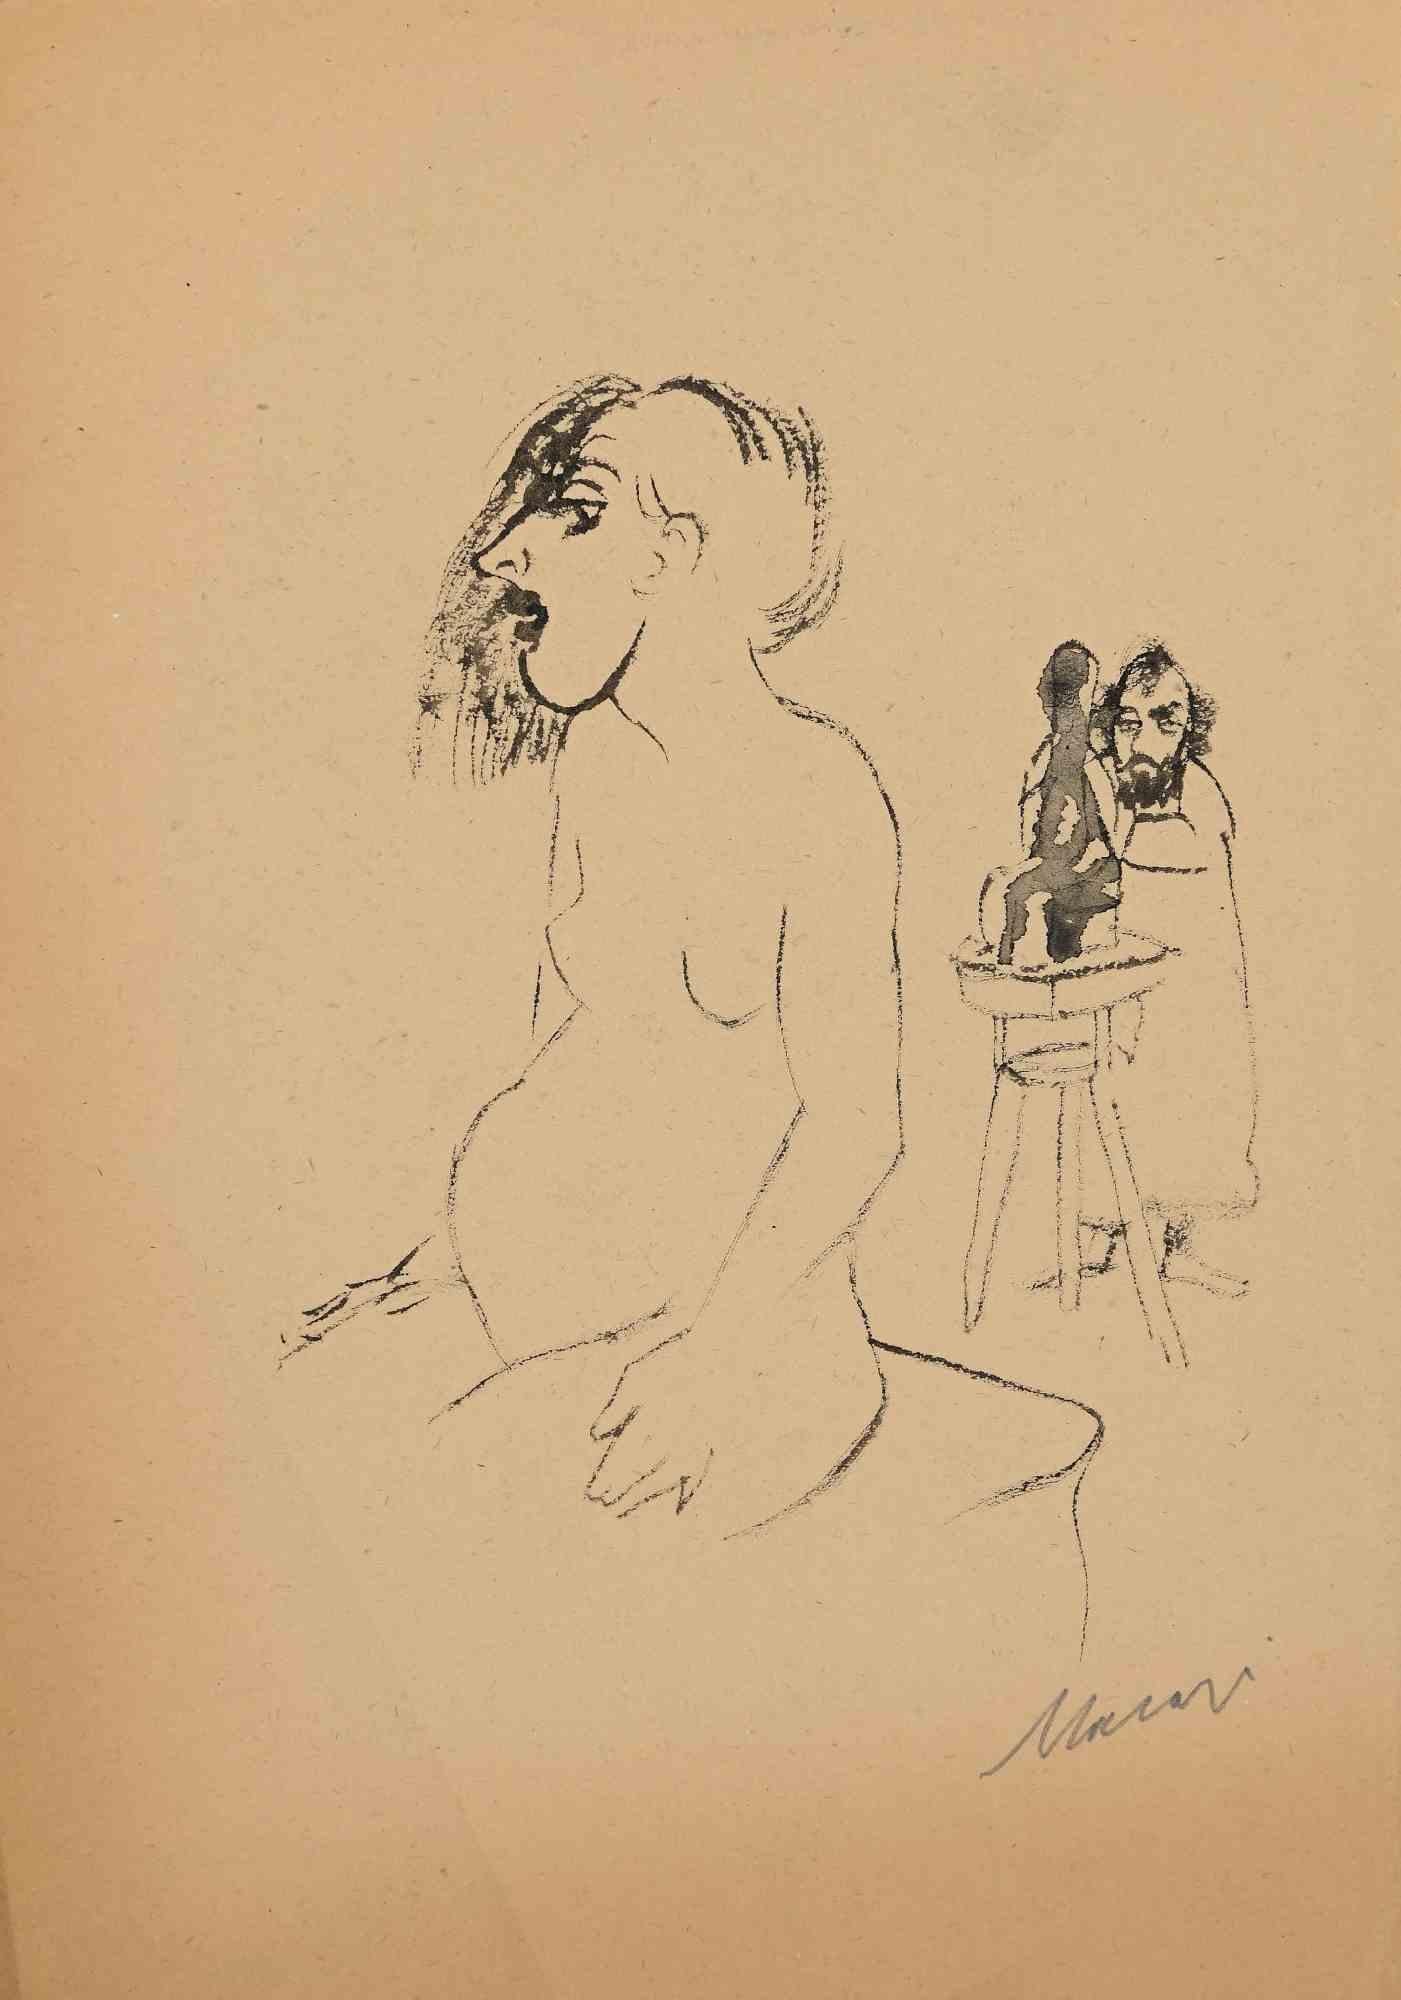 Sculptor and Model is an original China Ink Drawing realized by Mino Maccari in mid-20th Century.

Good condition on a brown paper.

Hand-signed by the artist with pencil.

Mino Maccari (1898-1989) was an Italian writer, painter, engraver and